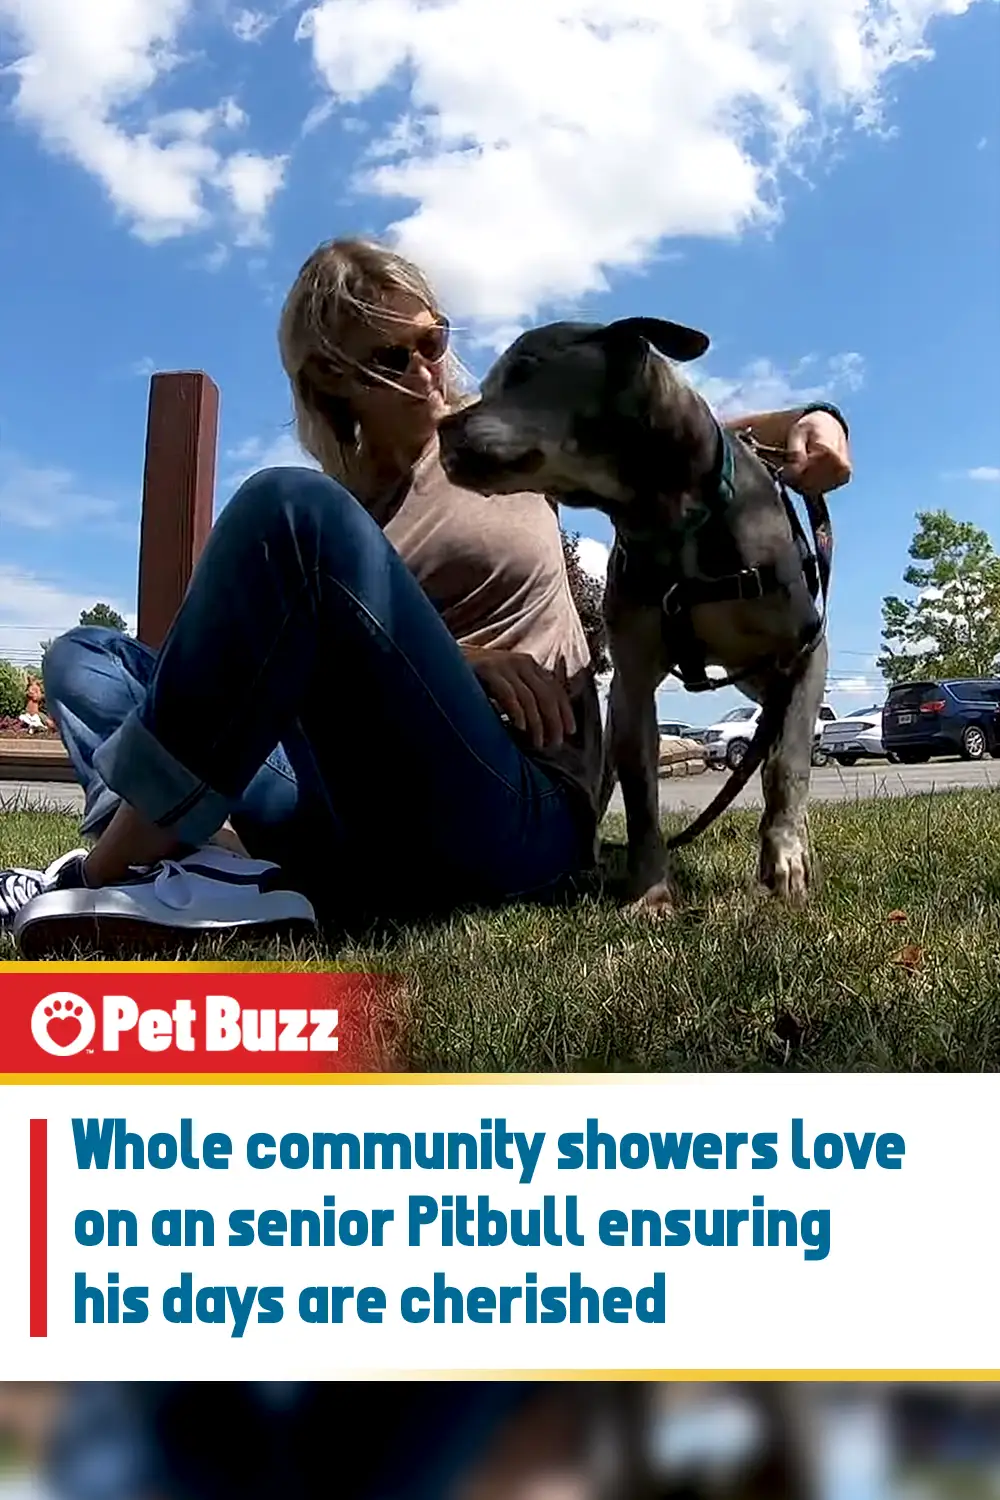 Whole community showers love on an senior Pitbull ensuring his days are cherished